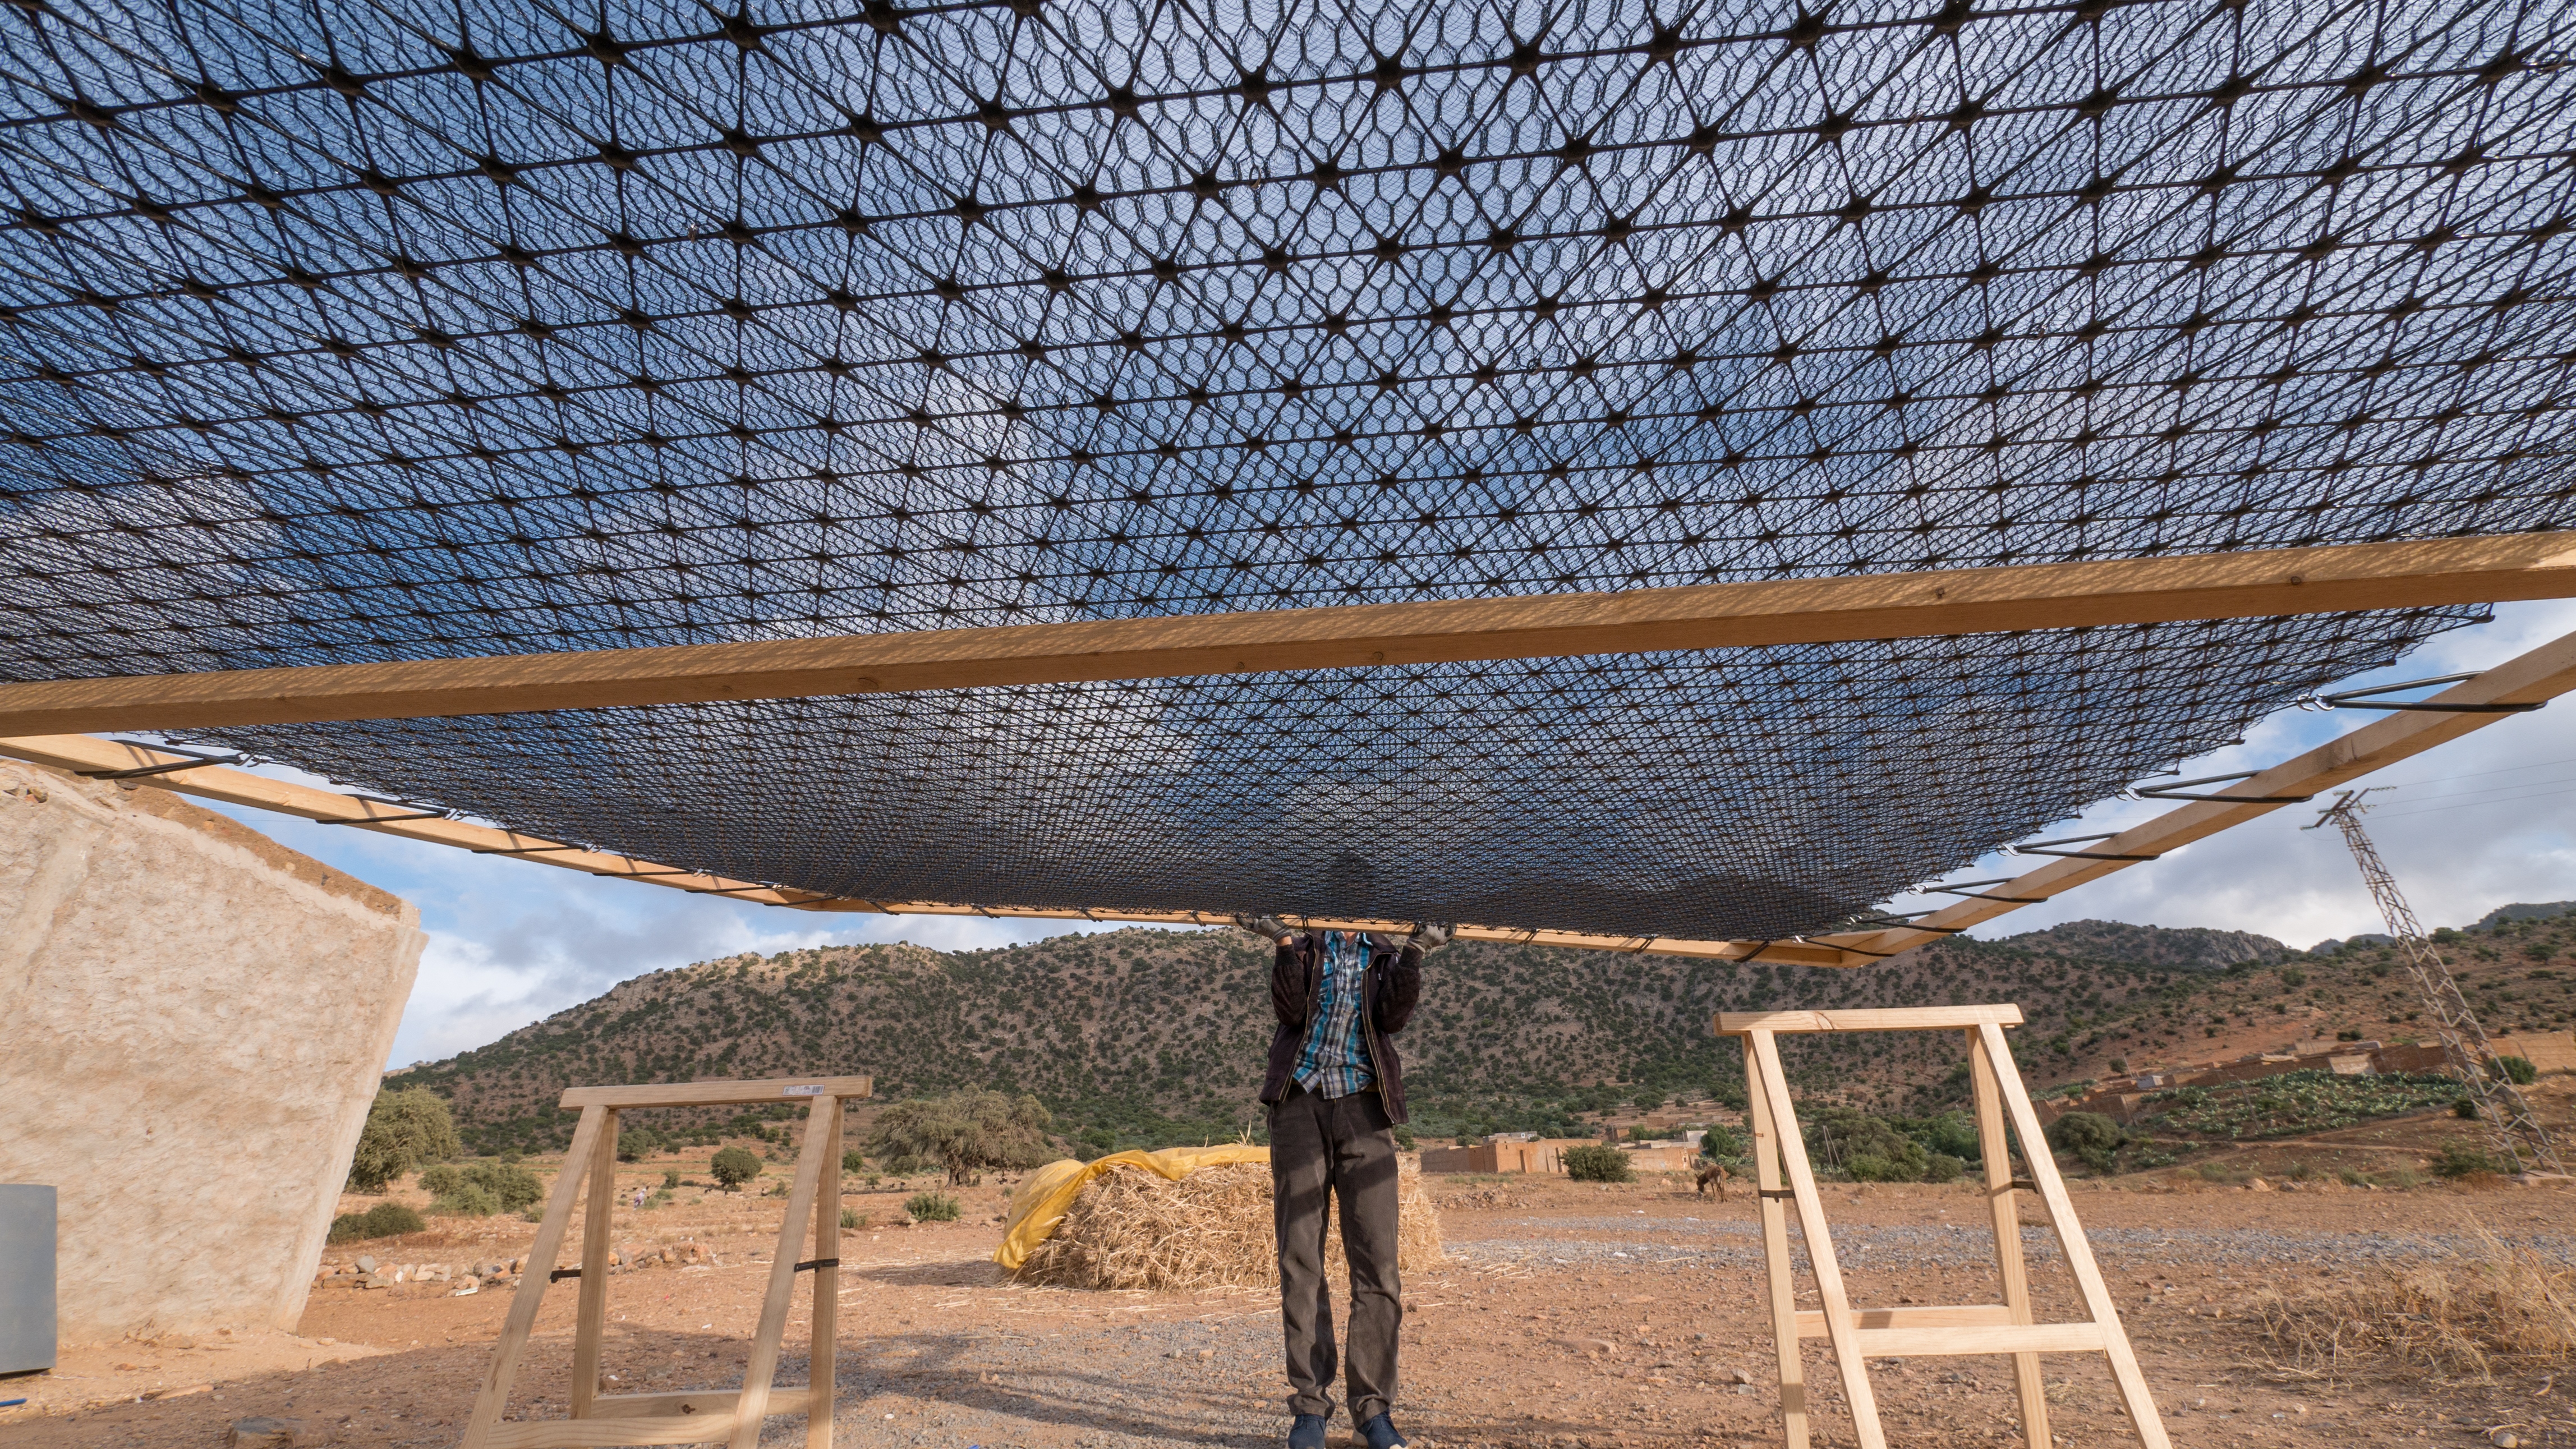 13/17:The team began to fasten the 3D fabric to the plastic support grid in May 2017.